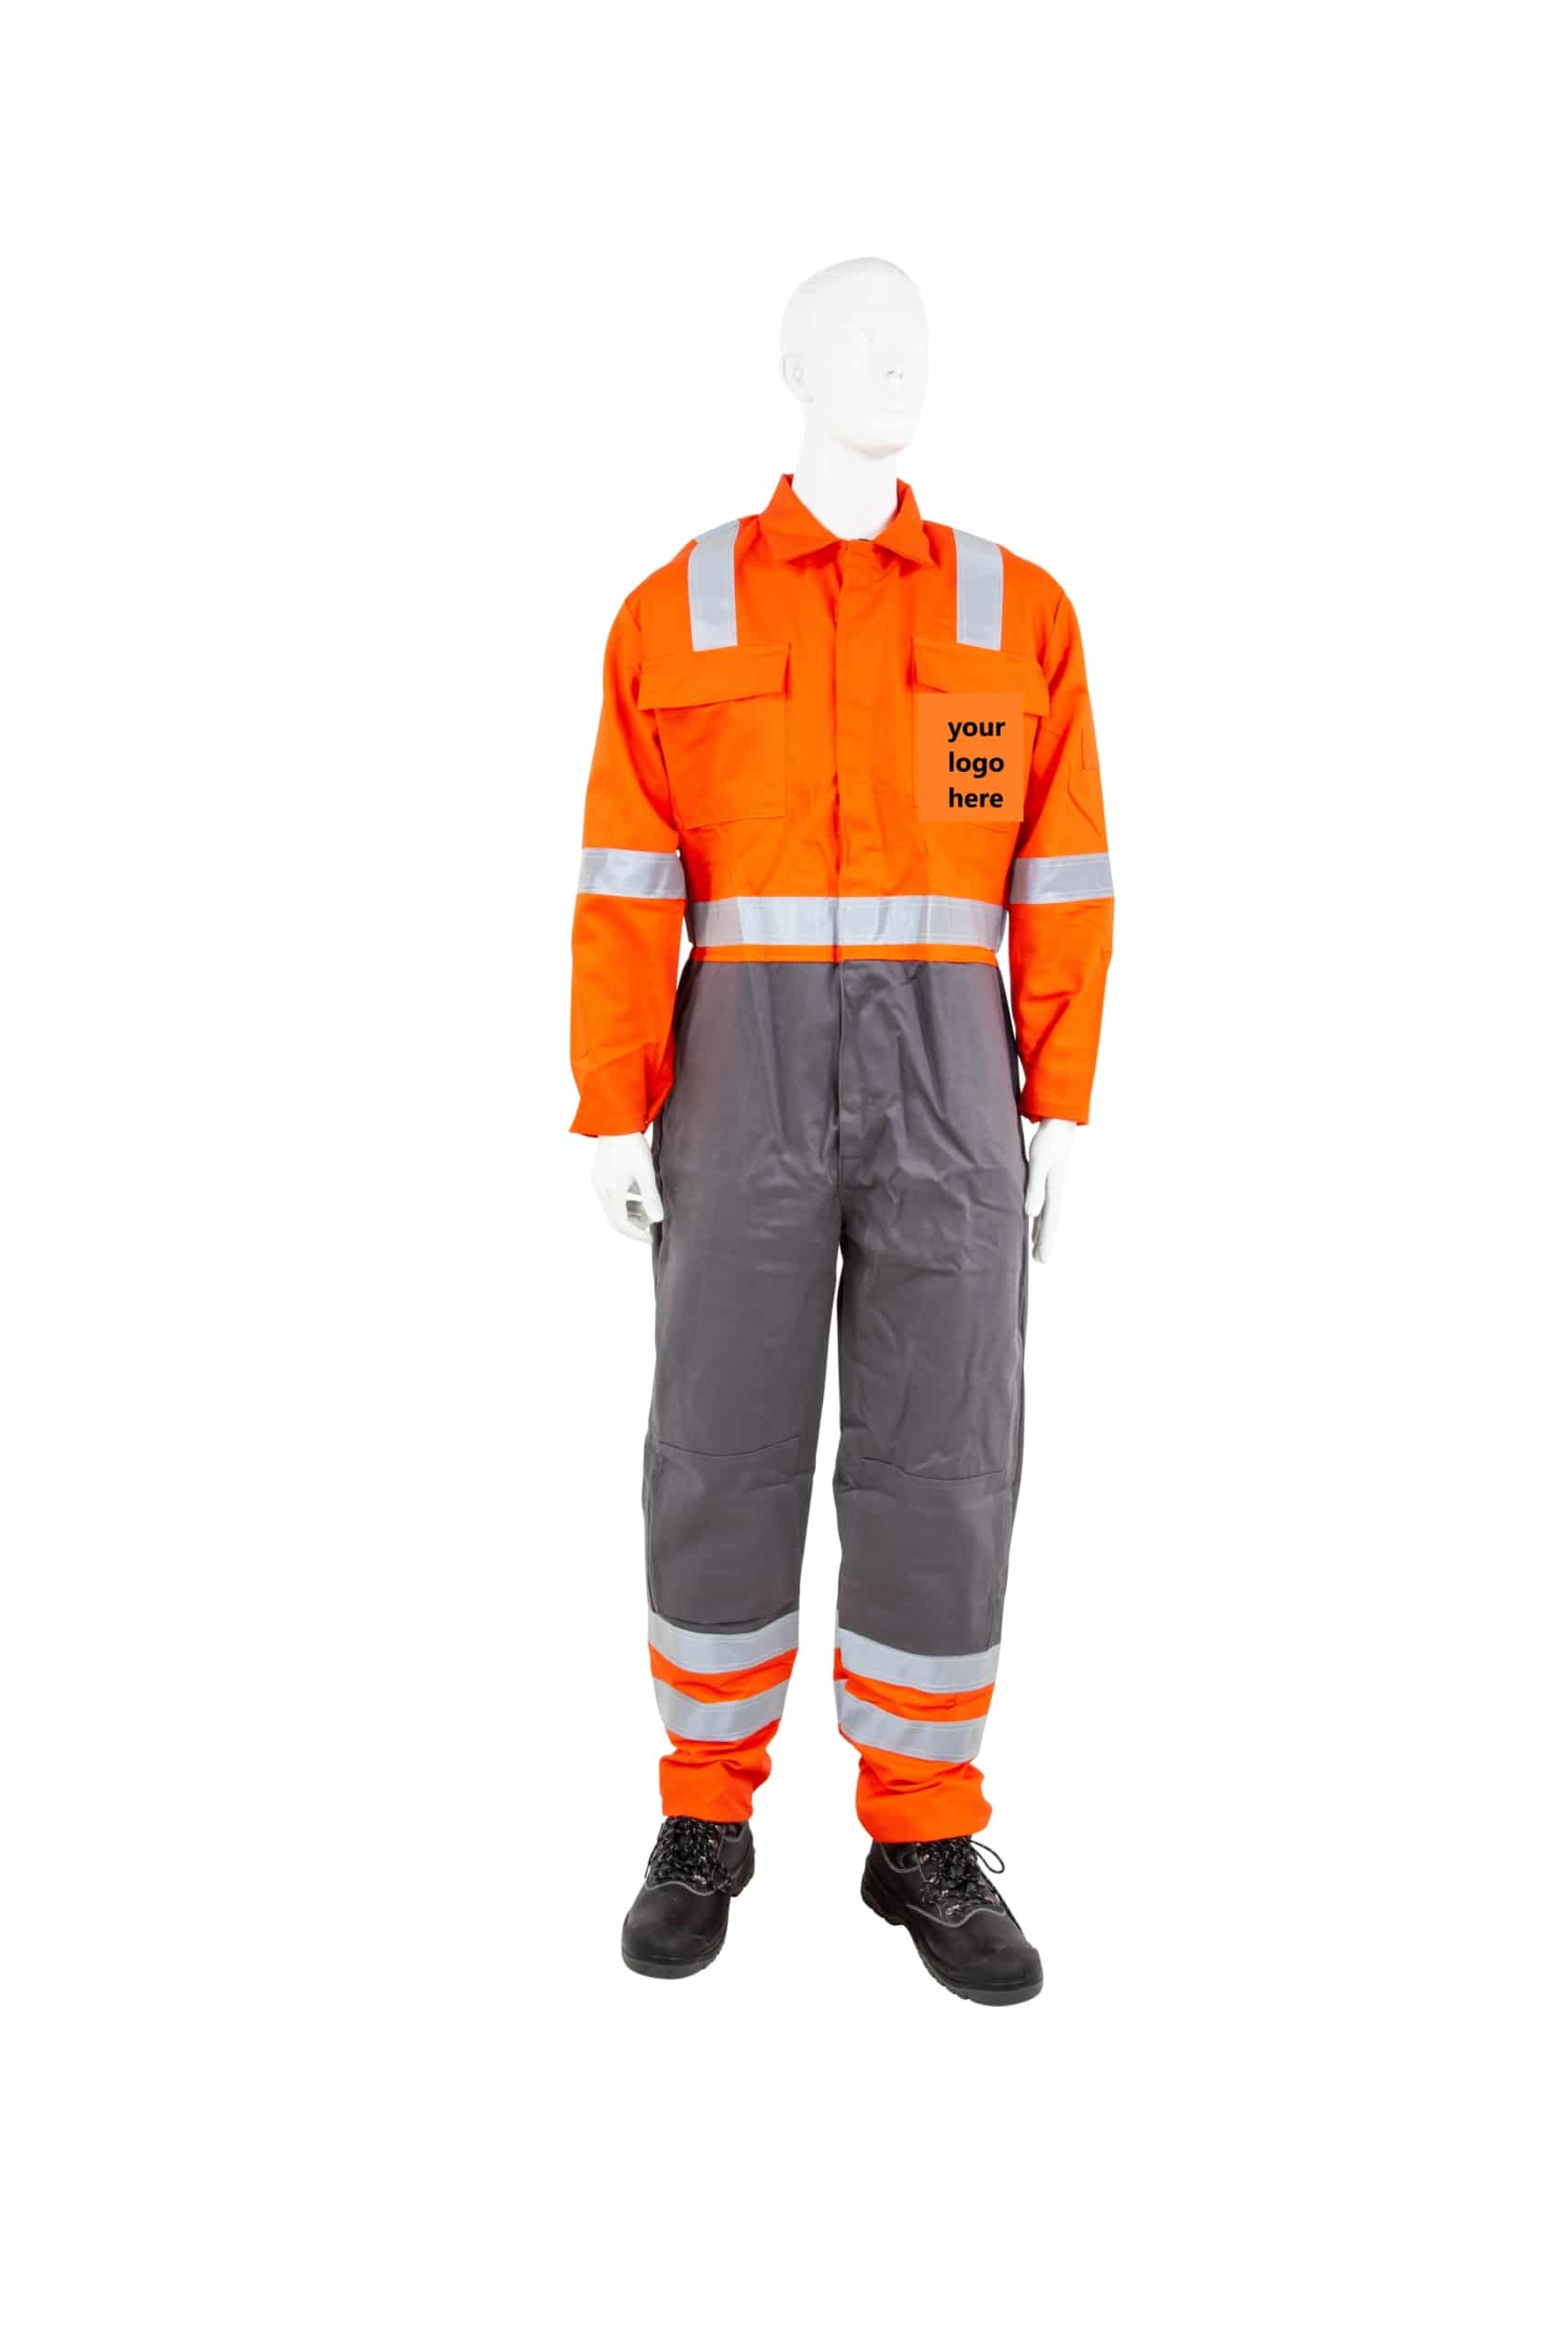 https://www.provincialsafety.co.uk/wp-content/uploads/2020/12/Grey-Orange-TEI-overall-scaled.jpg